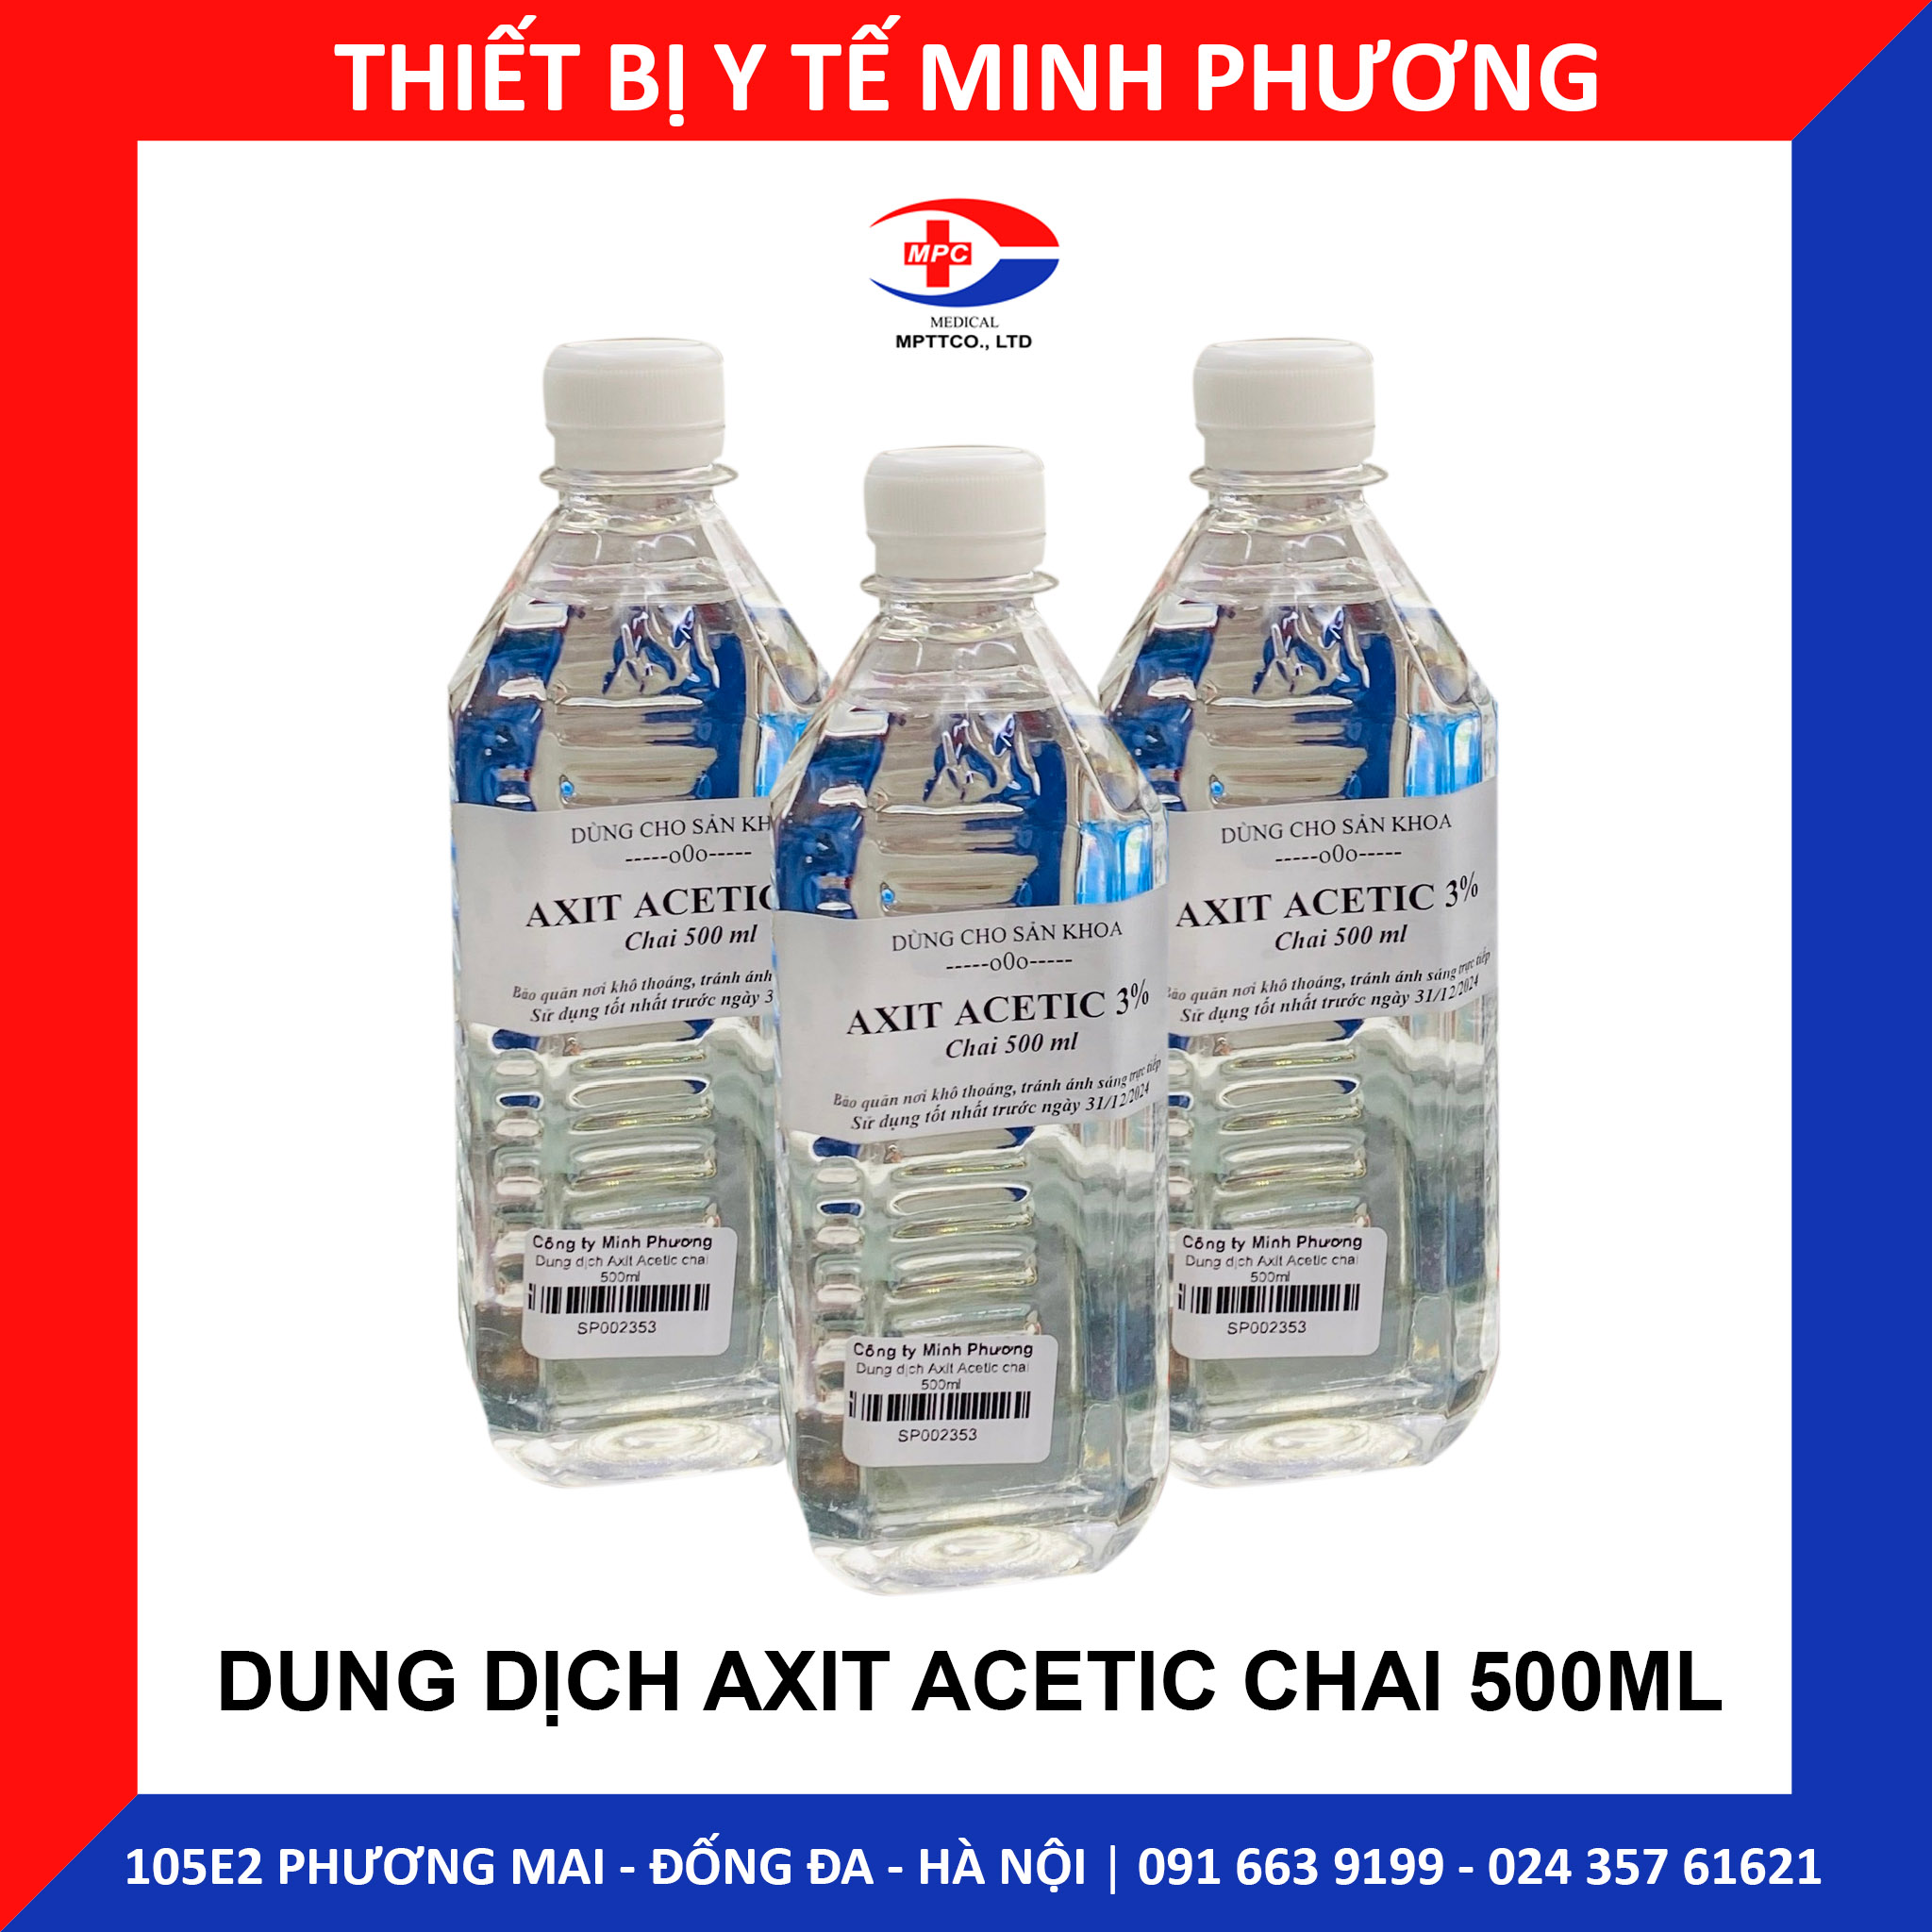 Dung dịch Axit Acetic chai 500ml